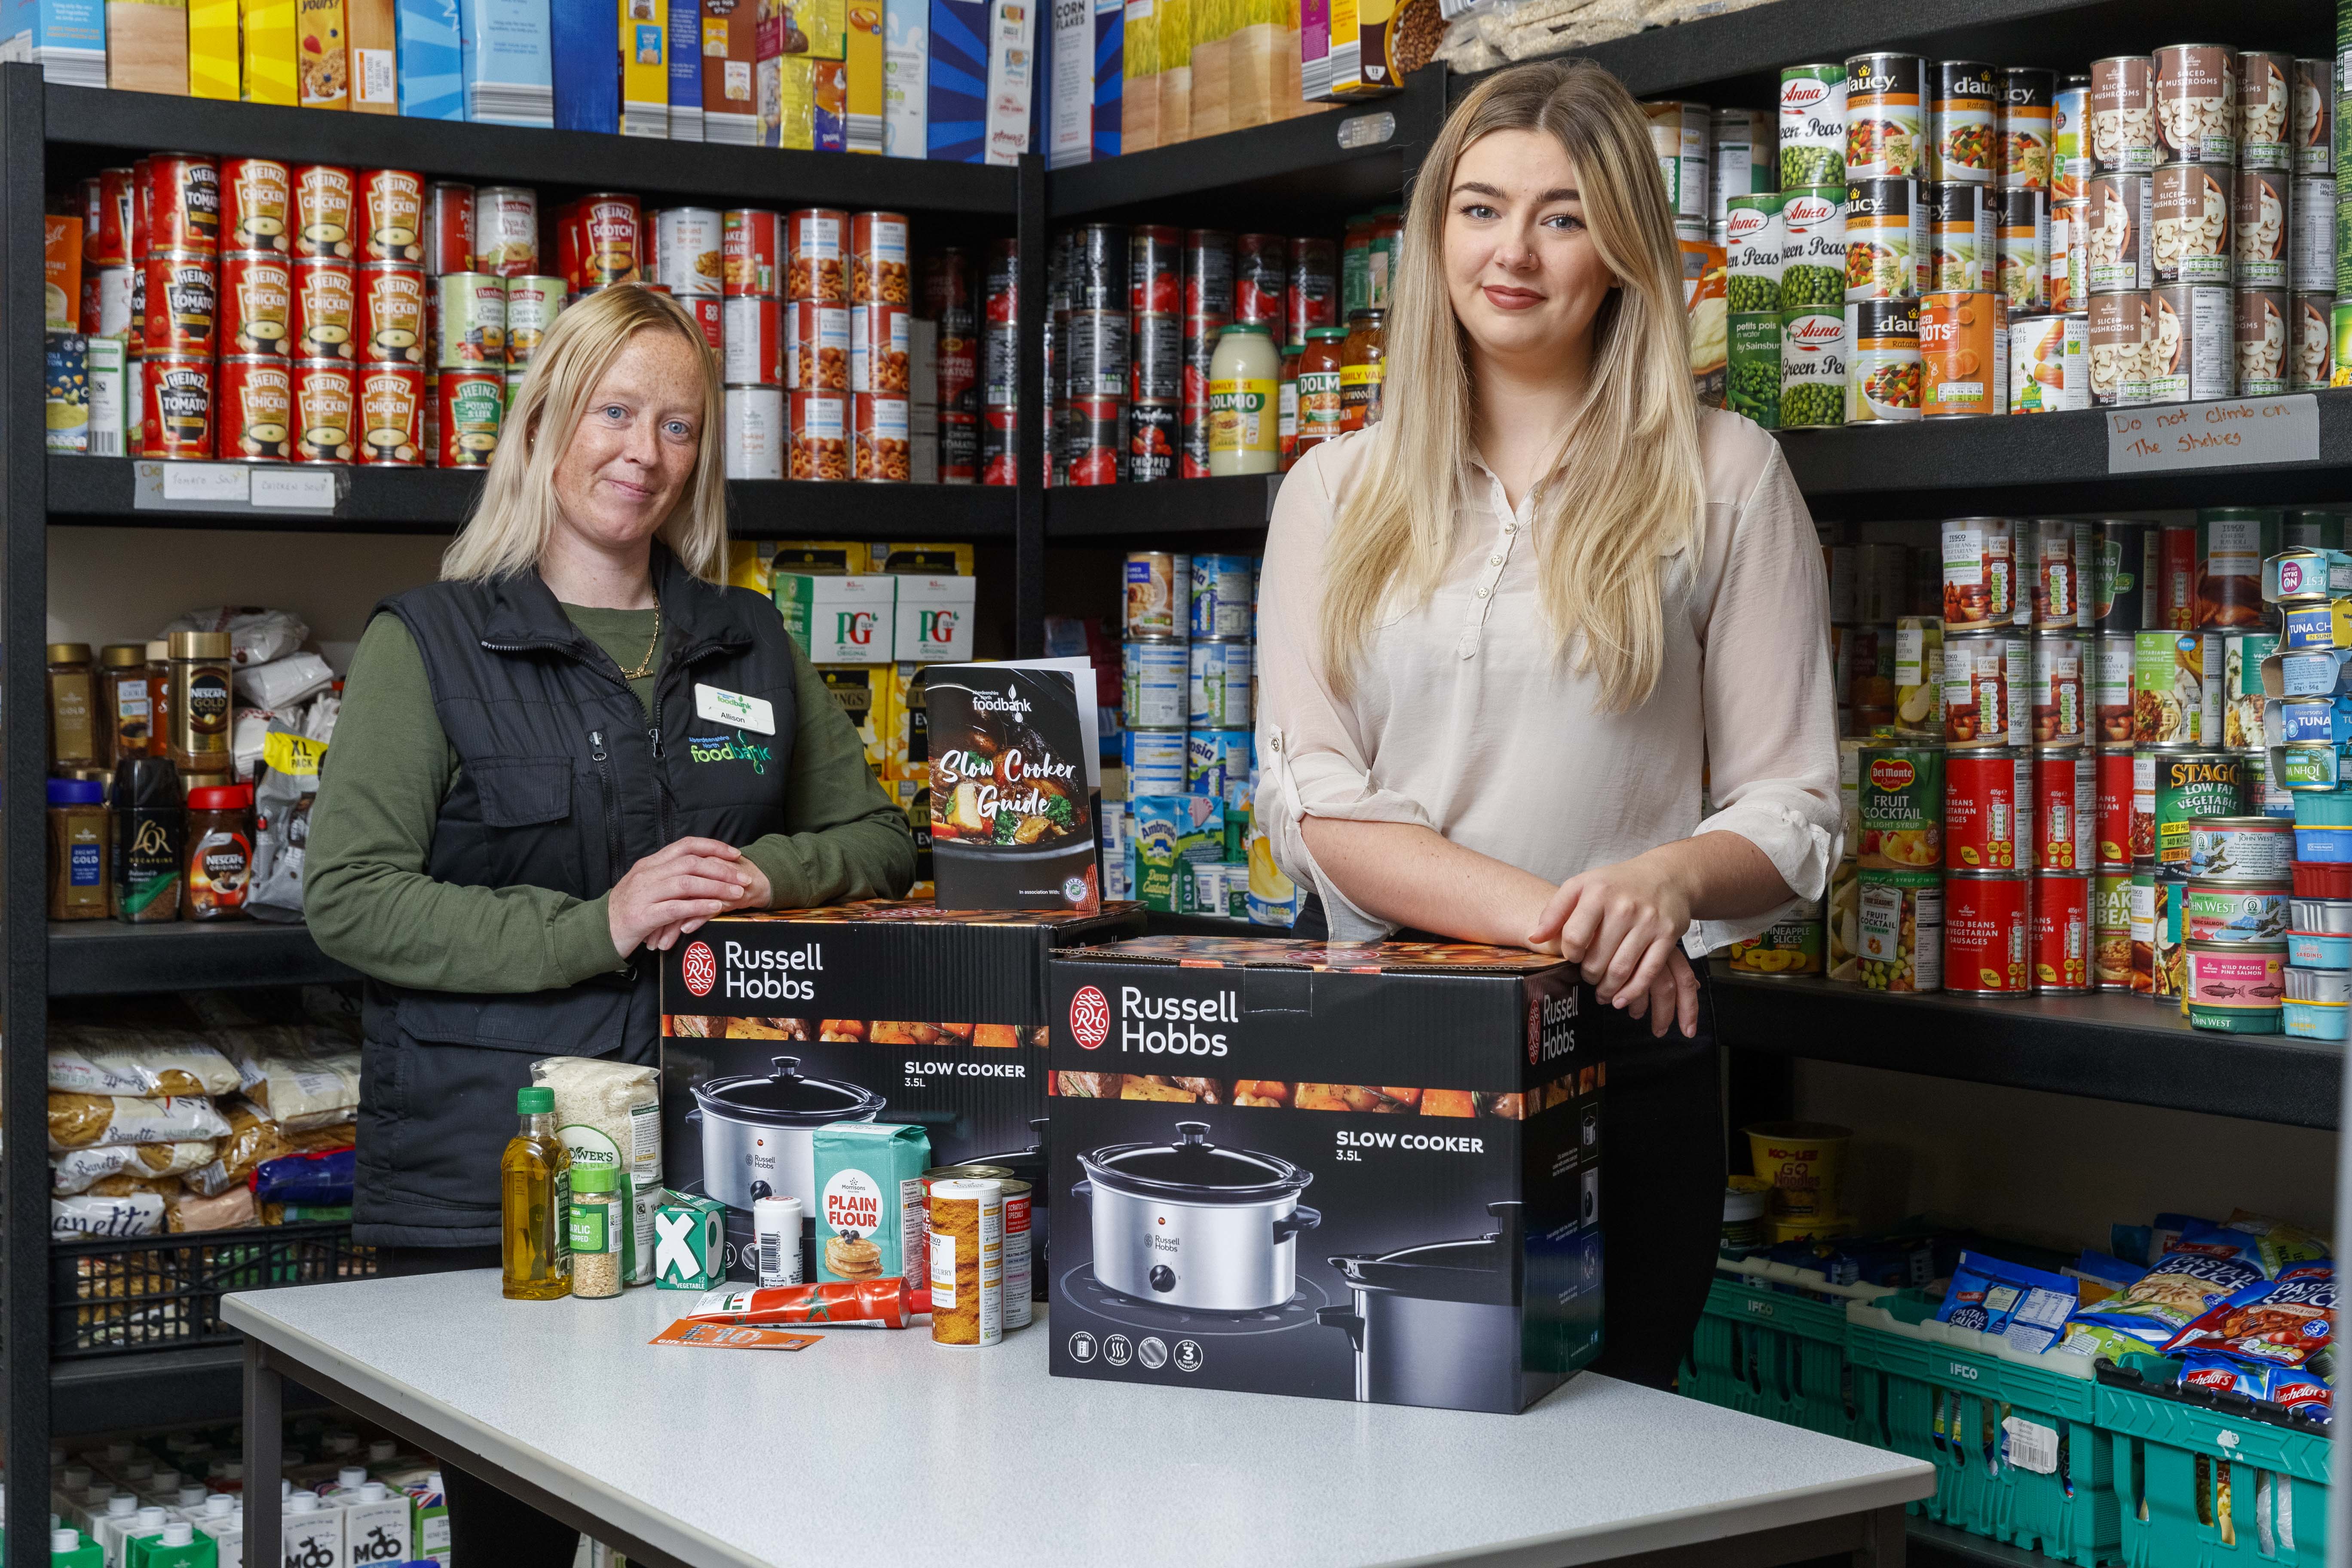 Aberdeenshire foodbank helps feed families in need thanks to CALA Homes grant